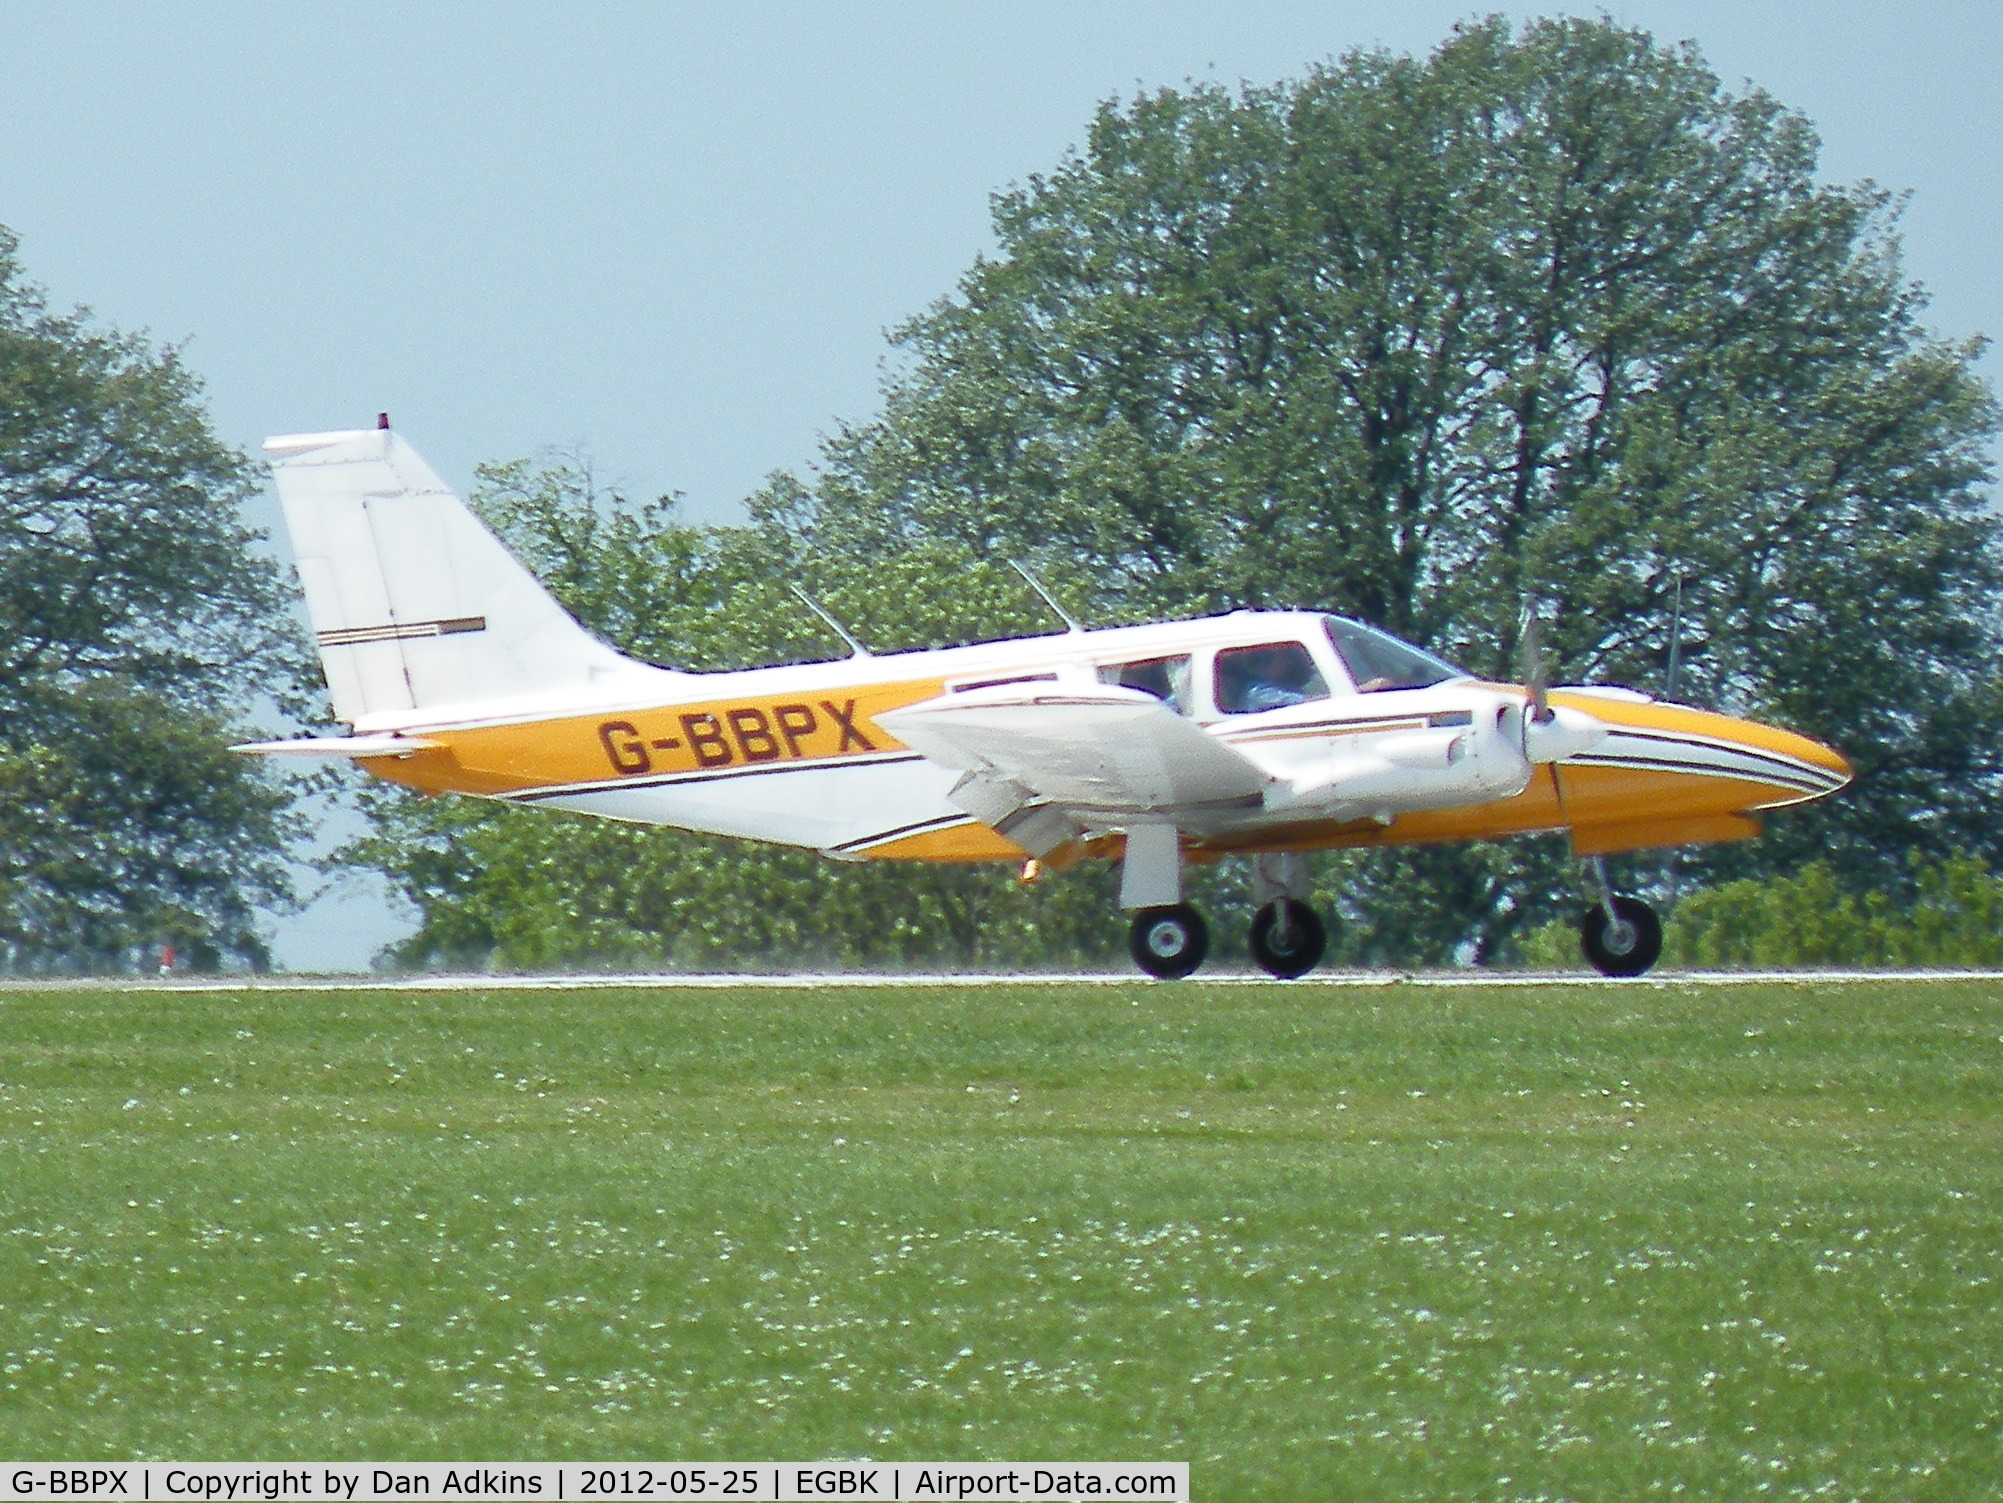 G-BBPX, 1972 Piper PA-34-200 Seneca C/N 34-7250262, G-BBPX arrives at the AeroExpo event at Sywell Aerodrome, Northamptonshire, UK, 25th May 2012.